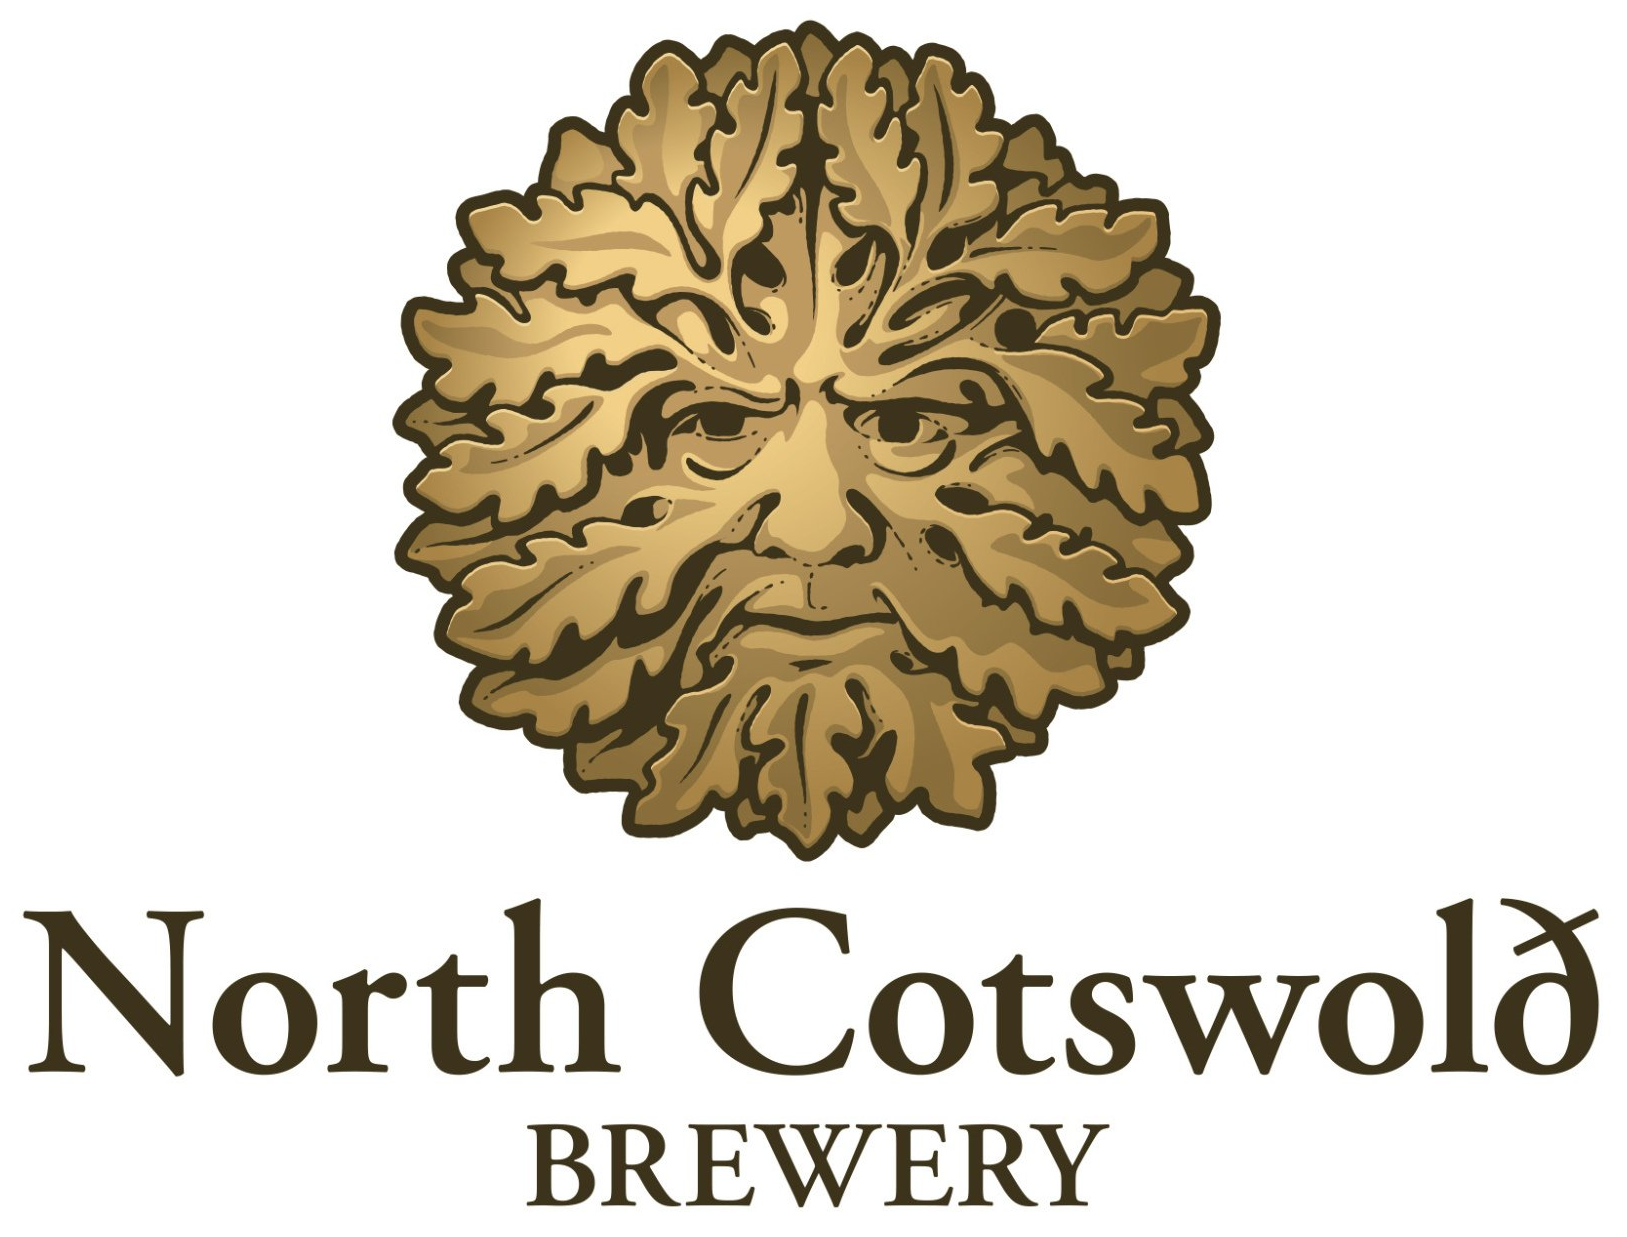 North Cotswold Brewery